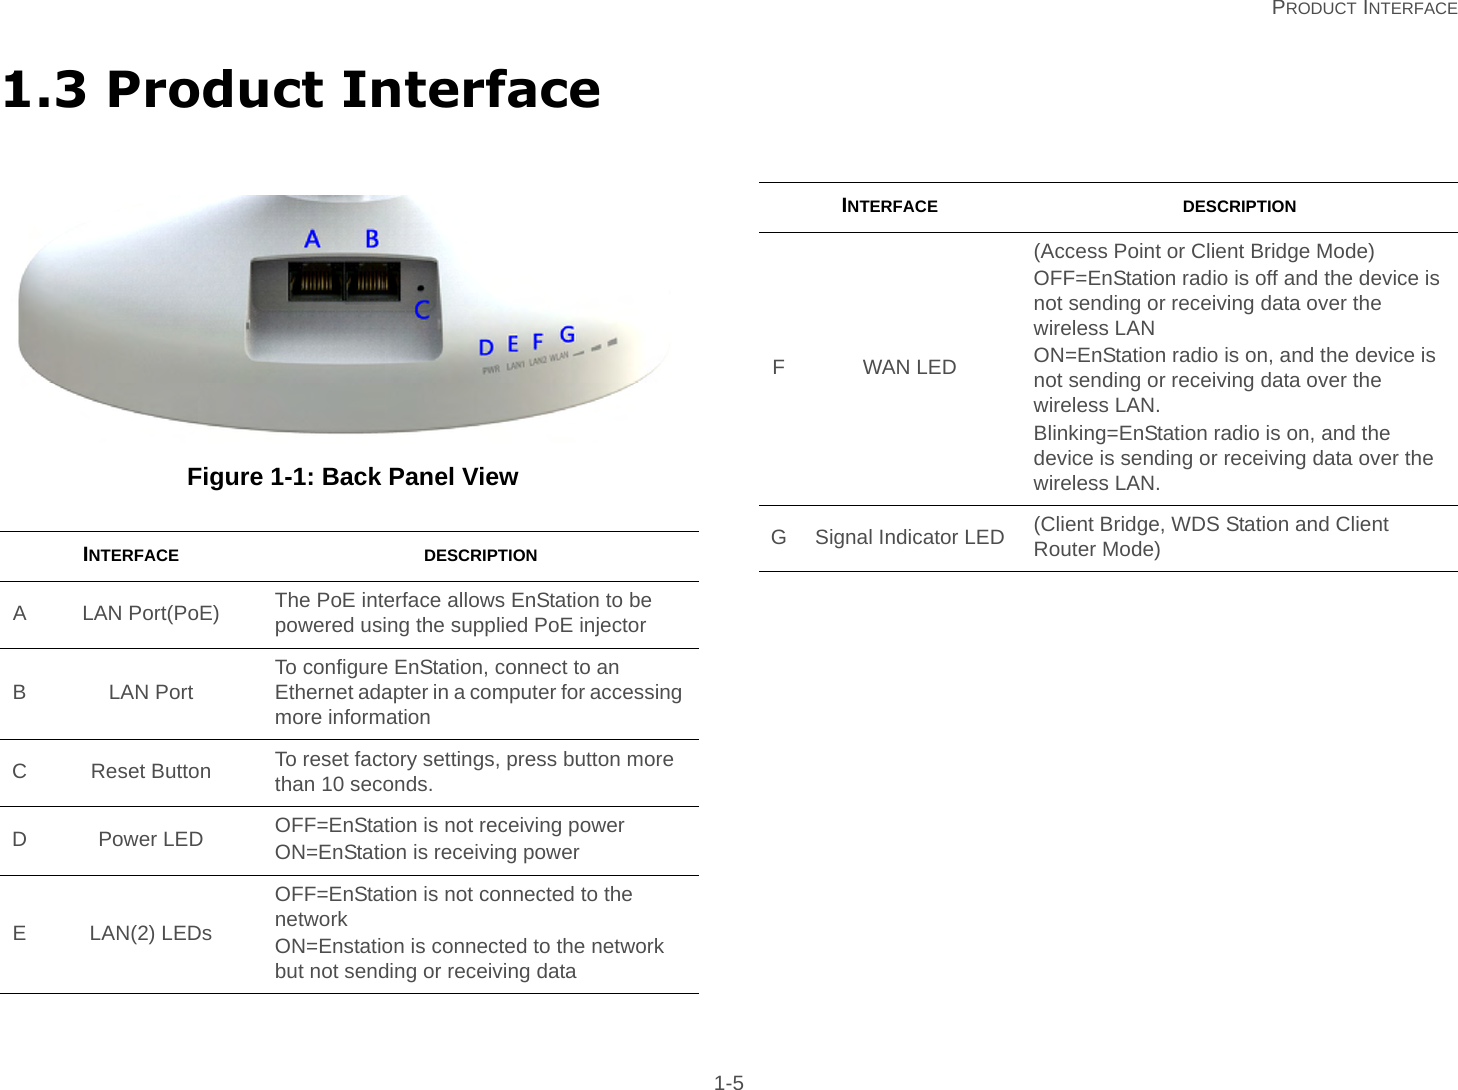   PRODUCT INTERFACE 1-51.3 Product Interface Figure 1-1: Back Panel ViewINTERFACE DESCRIPTIONALAN Port(PoE)The PoE interface allows EnStation to be powered using the supplied PoE injectorB LAN Port To configure EnStation, connect to an Ethernet adapter in a computer for accessing more informationC Reset Button To reset factory settings, press button more than 10 seconds.D Power LED OFF=EnStation is not receiving powerON=EnStation is receiving power E LAN(2) LEDsOFF=EnStation is not connected to the networkON=Enstation is connected to the network but not sending or receiving dataFWAN LED(Access Point or Client Bridge Mode)OFF=EnStation radio is off and the device is not sending or receiving data over the wireless LANON=EnStation radio is on, and the device is not sending or receiving data over the wireless LAN.Blinking=EnStation radio is on, and the device is sending or receiving data over the wireless LAN.G Signal Indicator LED (Client Bridge, WDS Station and Client Router Mode)INTERFACE DESCRIPTION